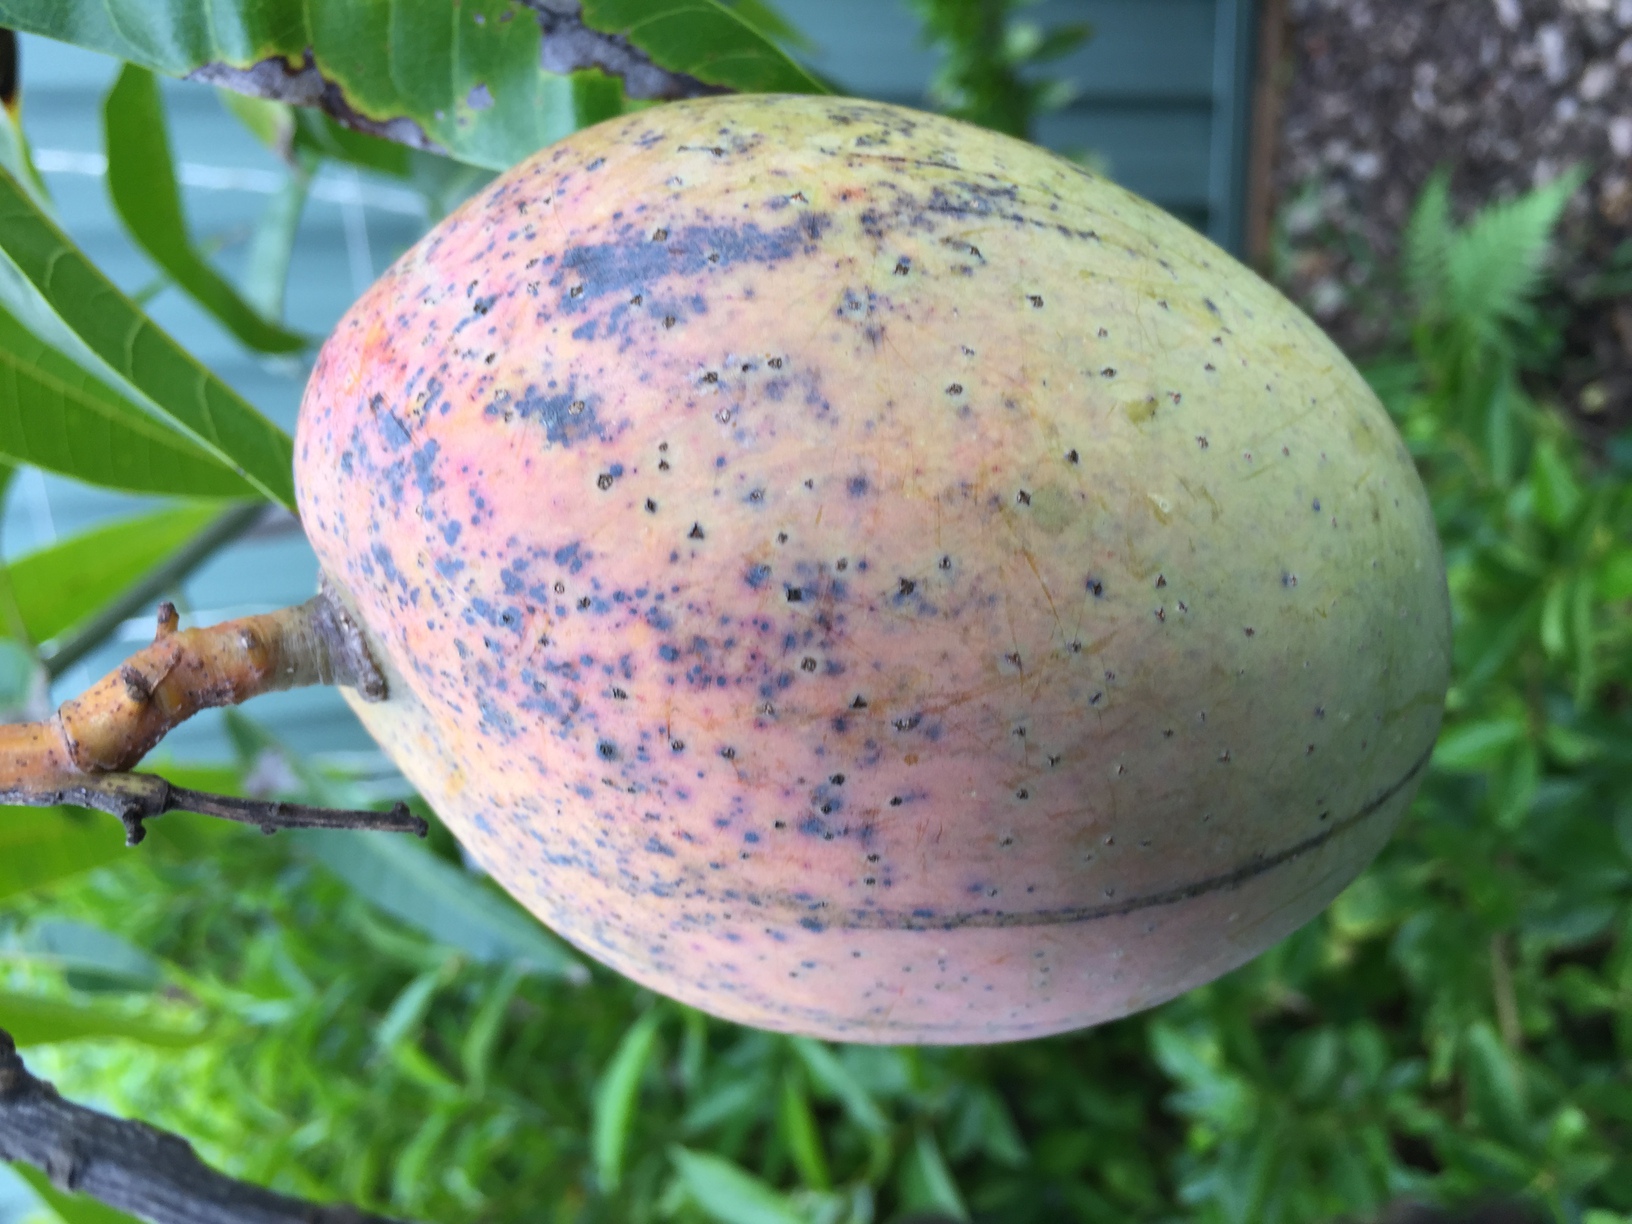 My one and only mango (Kensington Pride). I have had to treat the trees for fungal diseases, which I believe is what is causing the black spots on the leaves and fruit.